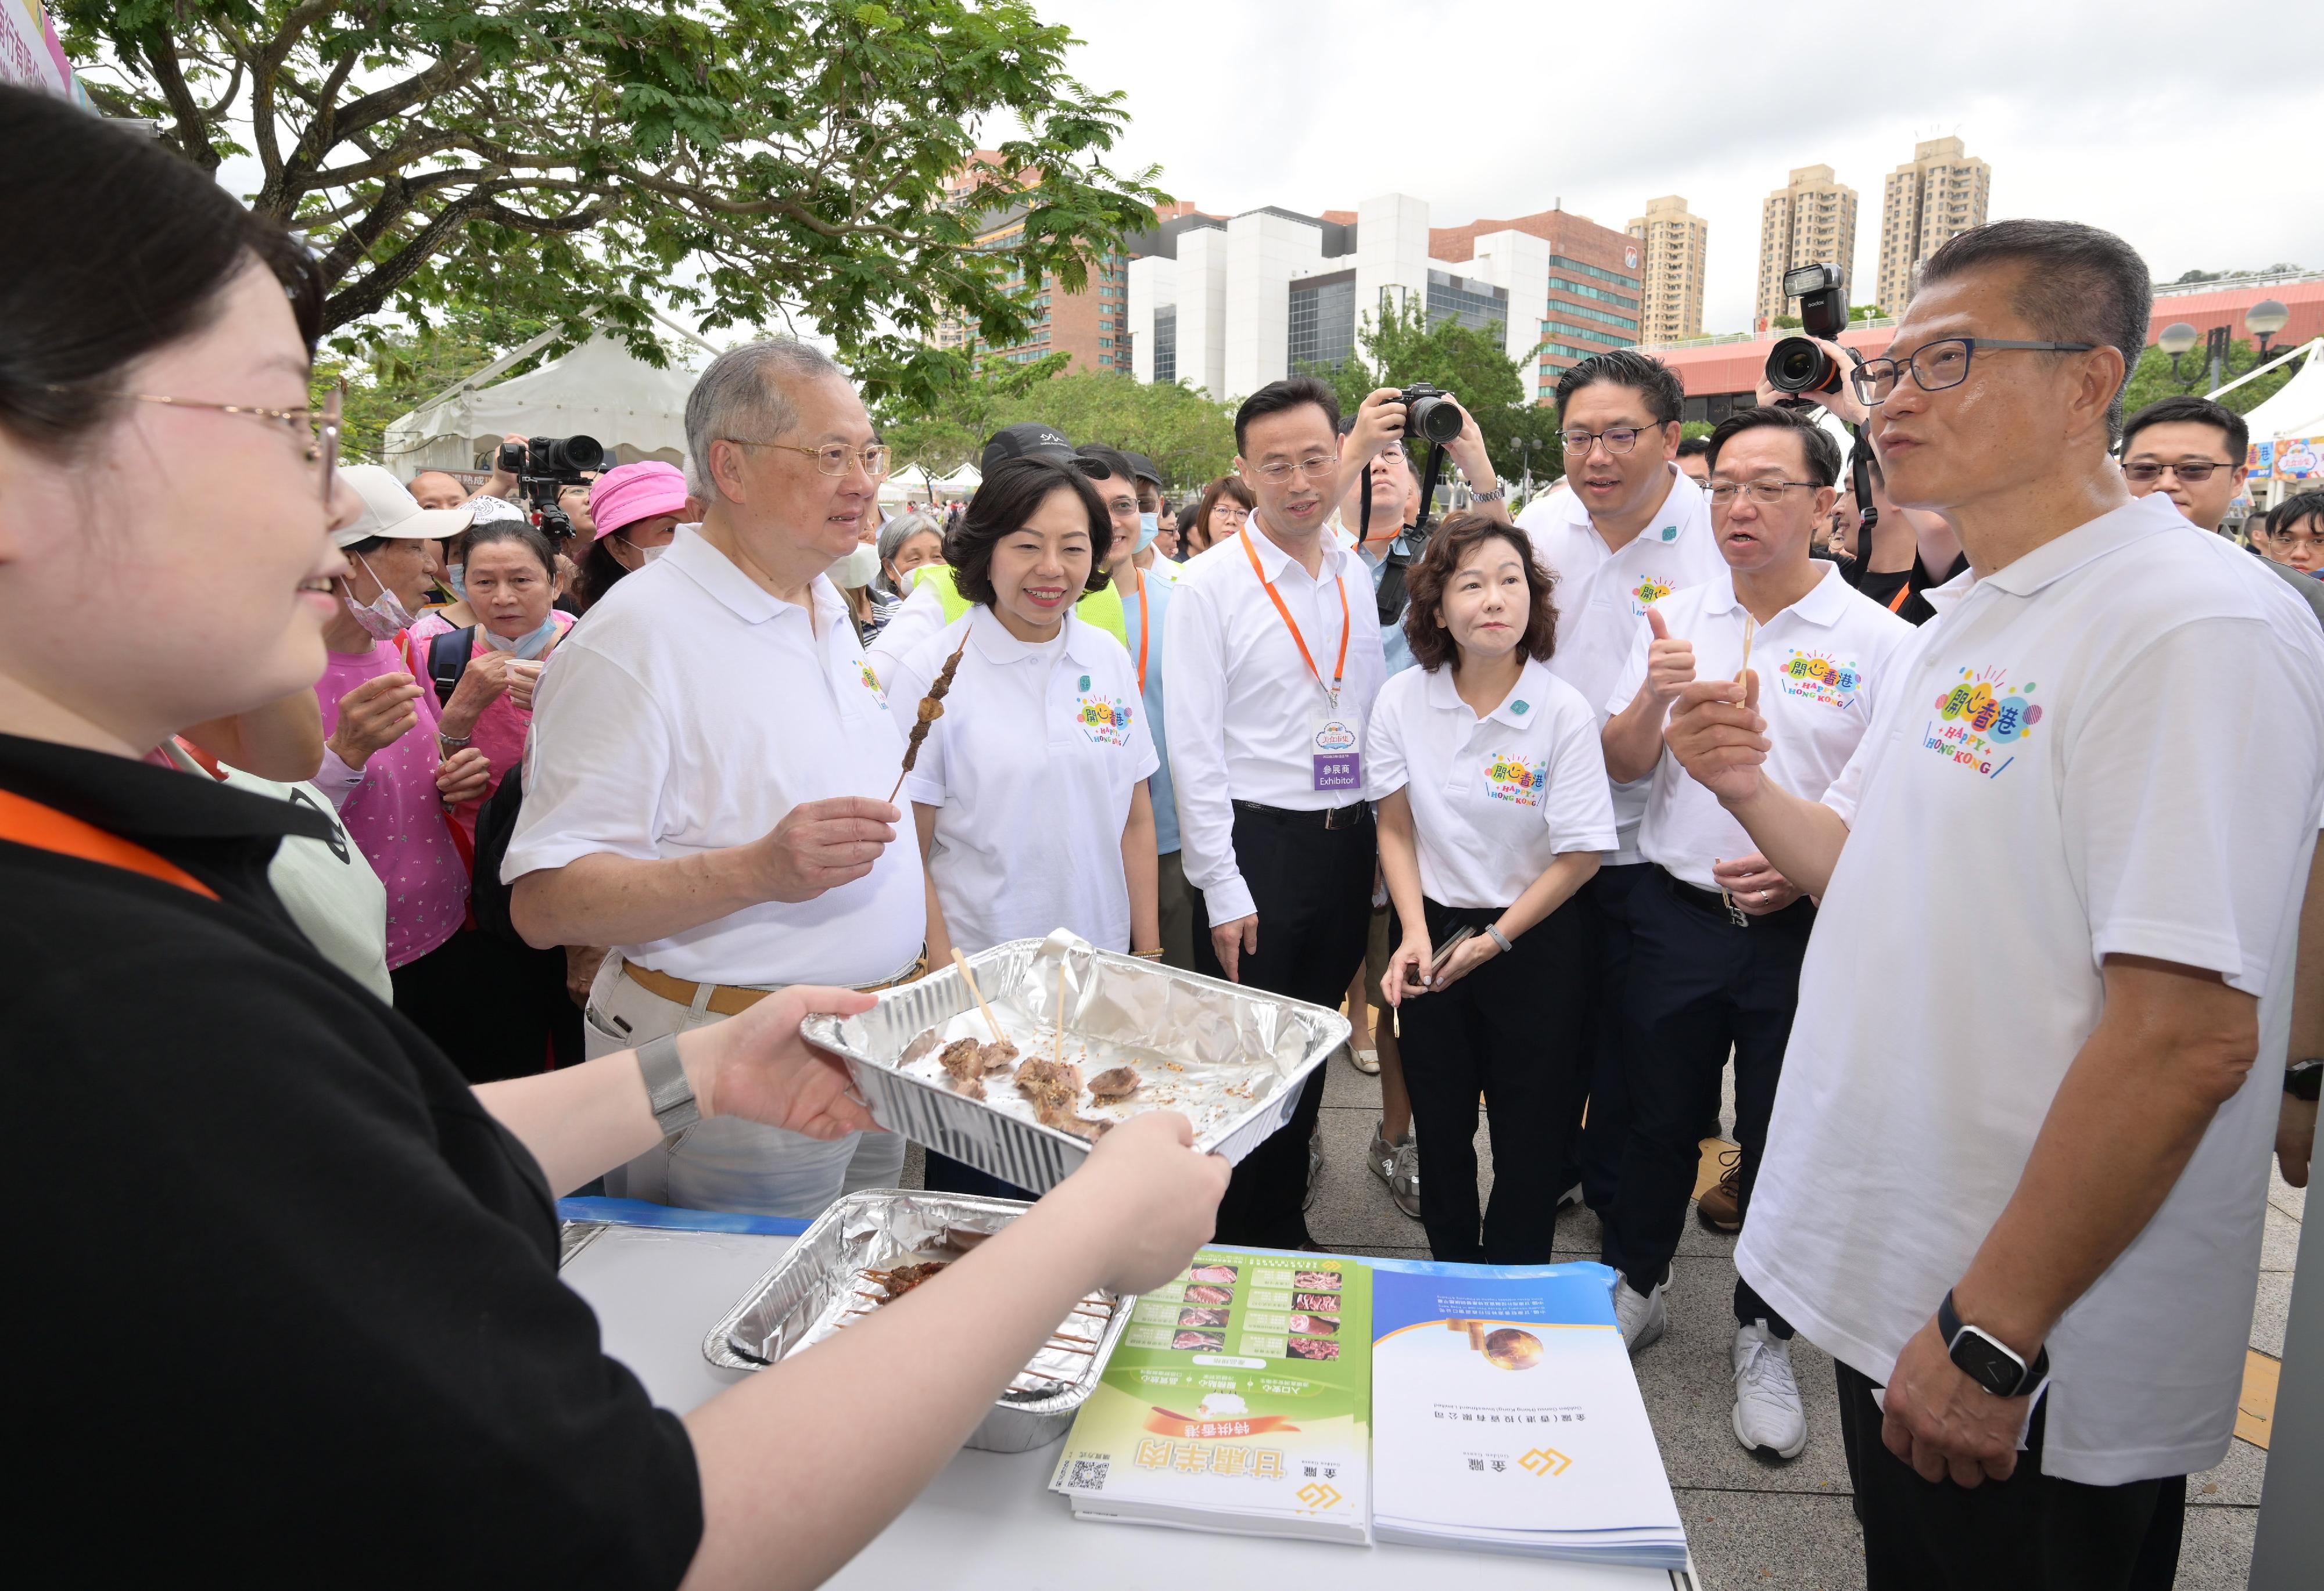 The Financial Secretary, Mr Paul Chan, officiated at the opening ceremony of the second "Happy Hong Kong" Gourmet Marketplace today (May 6). Photo shows Mr Chan (first right), accompanied by the Secretary for Home and Youth Affairs, Miss Alice Mak (third left); the Under Secretary for Home and Youth Affairs, Mr Clarence Leung (third right); the Director of Home Affairs, Mrs Alice Cheung (fourth right); Non-official Member of the Executive Council, Legislative Council (LegCo) Member (Catering) Mr Tommy Cheung (second left) and LegCo Member (Heung Yee Kuk), the Chairman of New Territories Heung Yee Kuk Mr Kenneth Lau (second right), sampling food at the Gourmet Marketplace.

